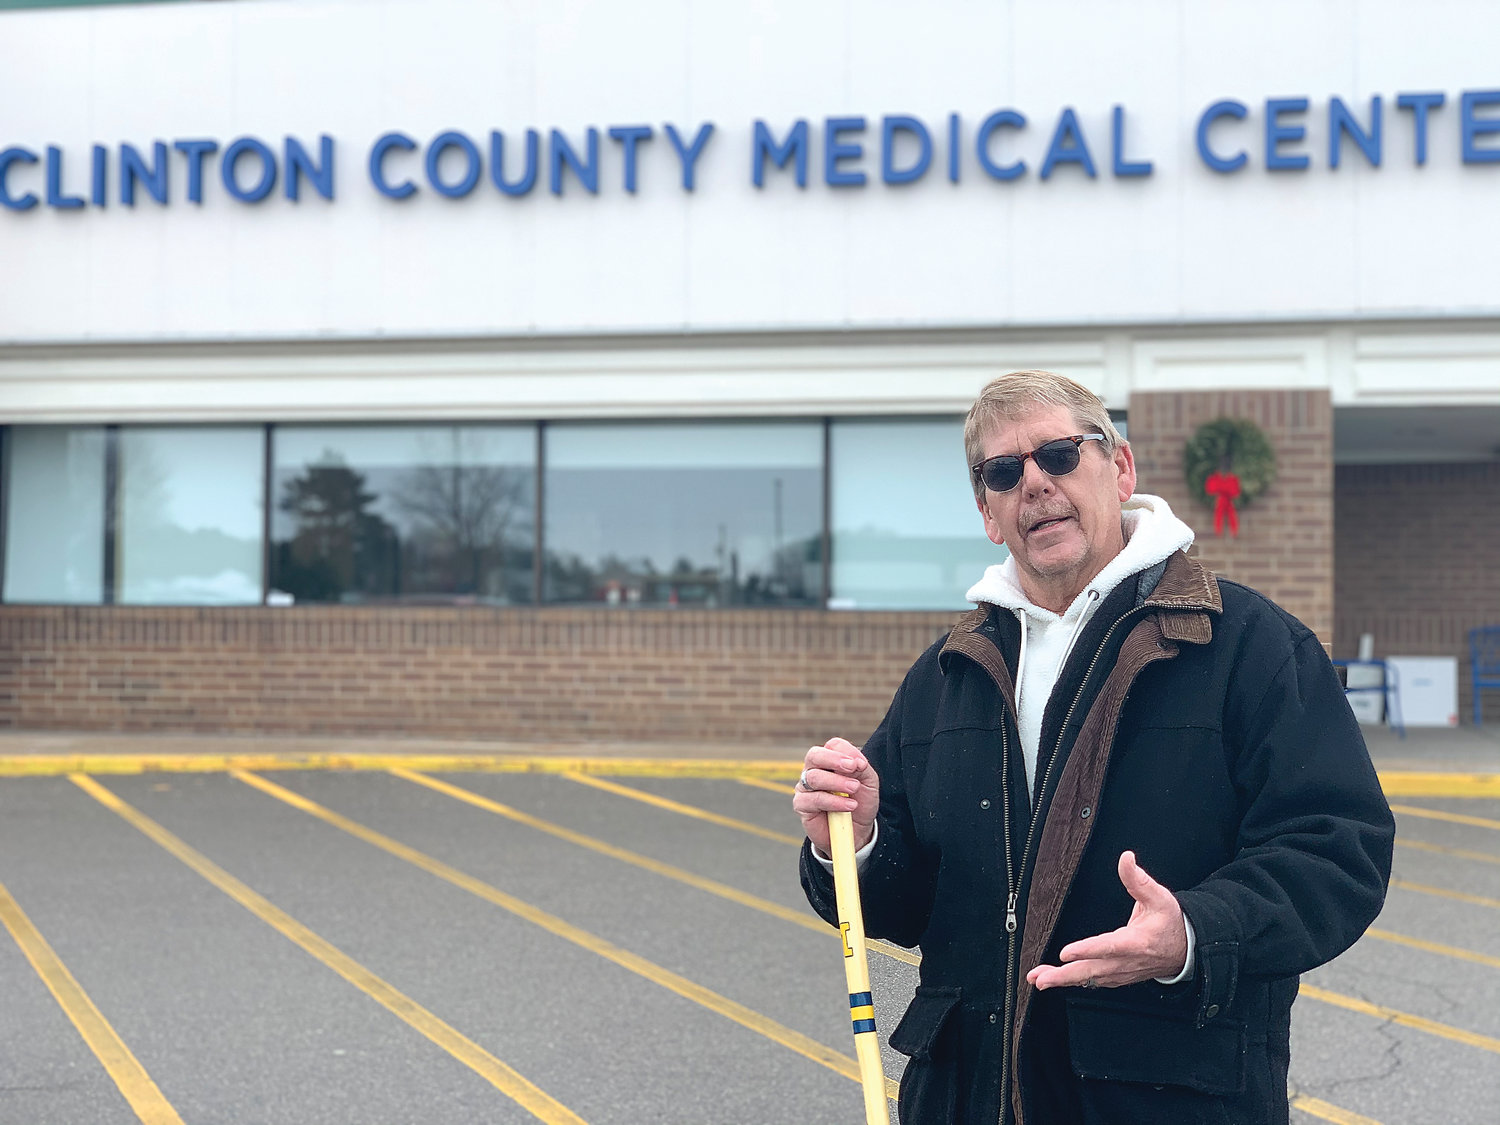 Doug Barnes, 62, of St. Johns, cannot receive prescription painkillers from Clinton County Medical Center because of his doctor’s restrictive policies against cannabis consumption.